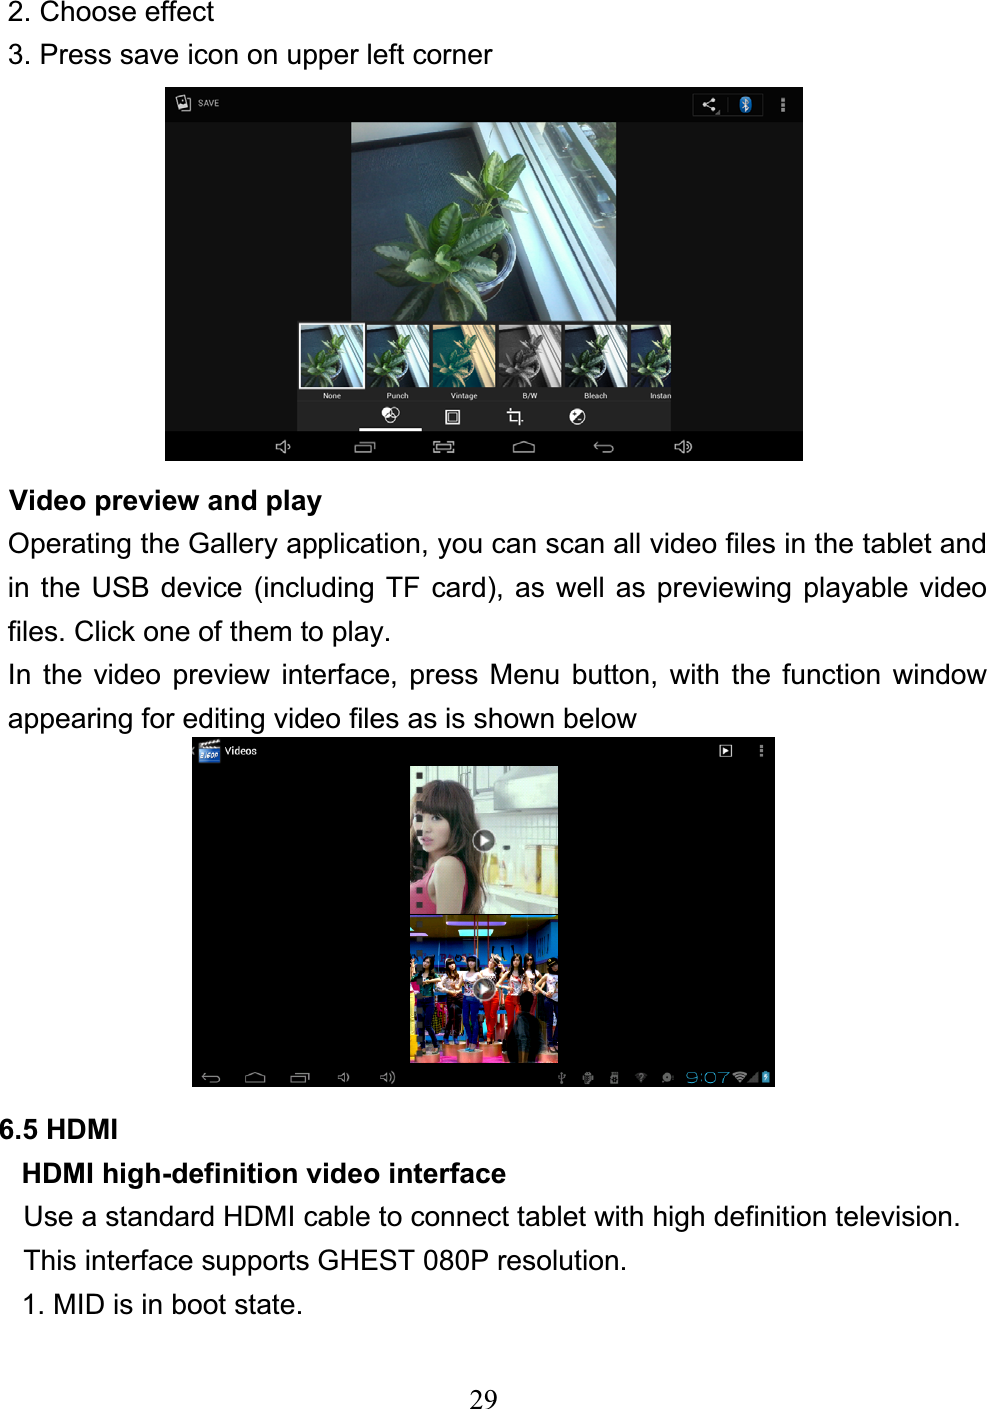 292. Choose effect 3. Press save icon on upper left corner Video preview and play Operating the Gallery application, you can scan all video files in the tablet and in the USB device (including TF card), as well as previewing playable video files. Click one of them to play. In the video preview interface, press Menu button, with the function window appearing for editing video files as is shown below 6.5 HDMI   HDMI high-definition video interface Use a standard HDMI cable to connect tablet with high definition television. This interface supports GHEST 080P resolution. 1. MID is in boot state. 